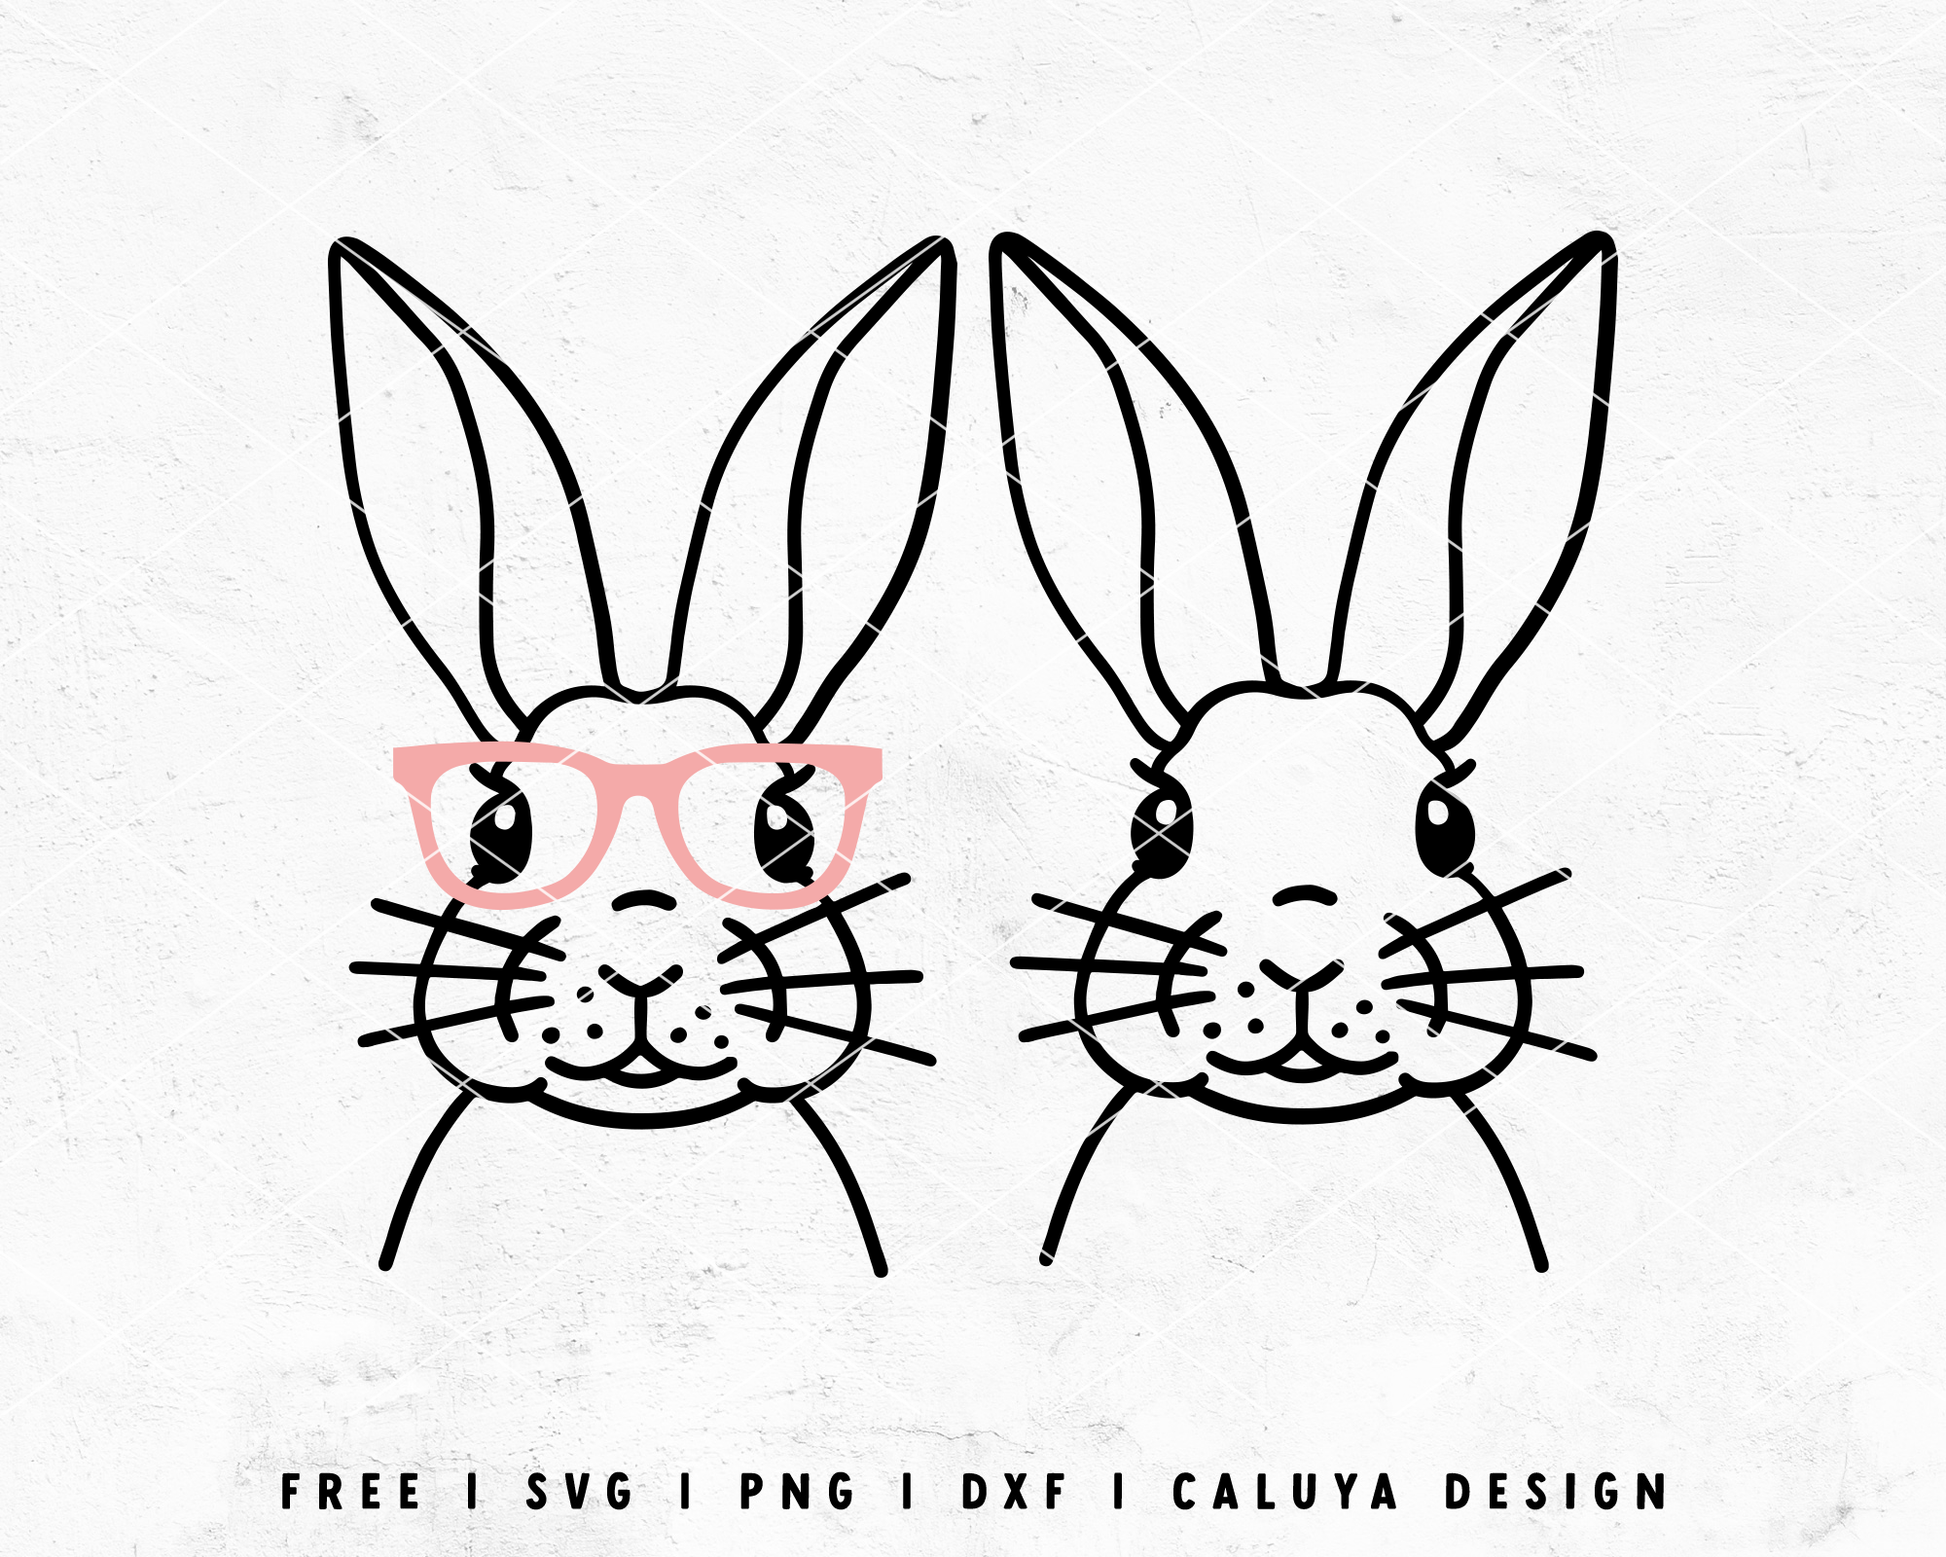 FREE Easter SVG | Cute Bunny SVG Cut File for Cricut, Cameo Silhouette | Free SVG Cut File